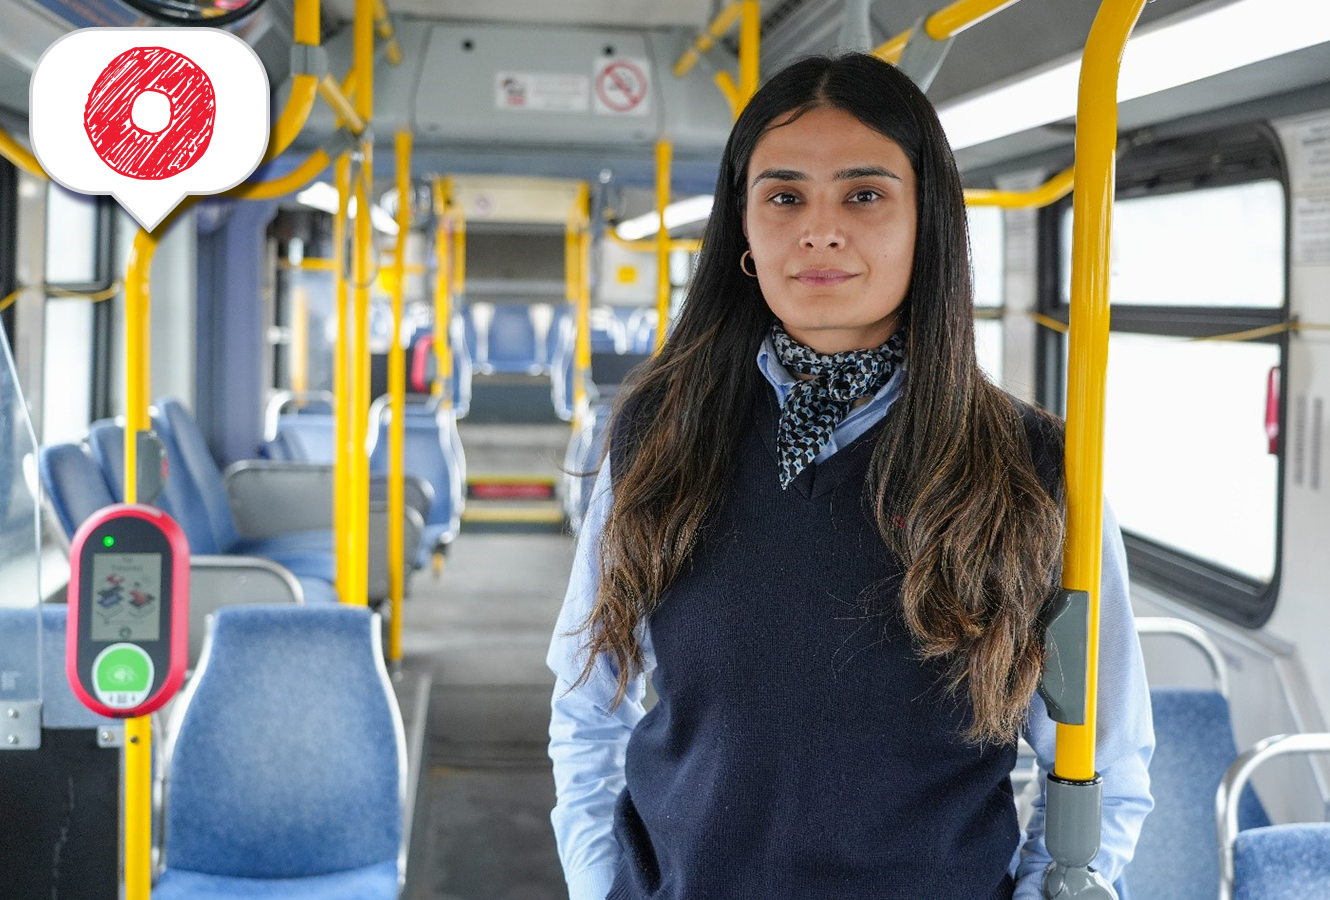 Image - Day in the life: Bus operator